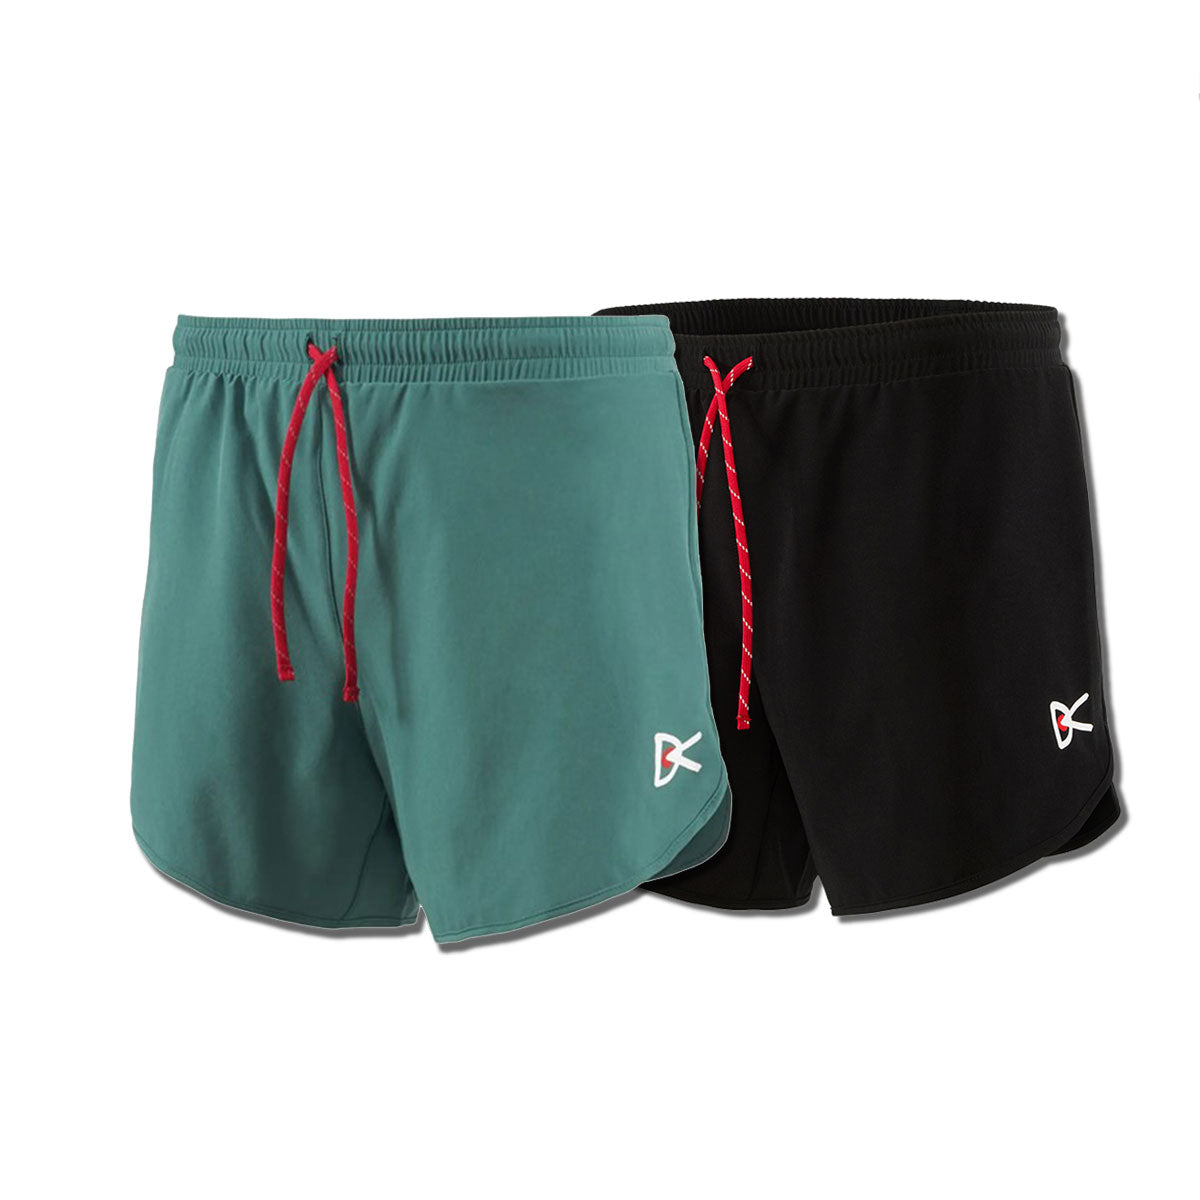 District Vision 5in Training Shorts